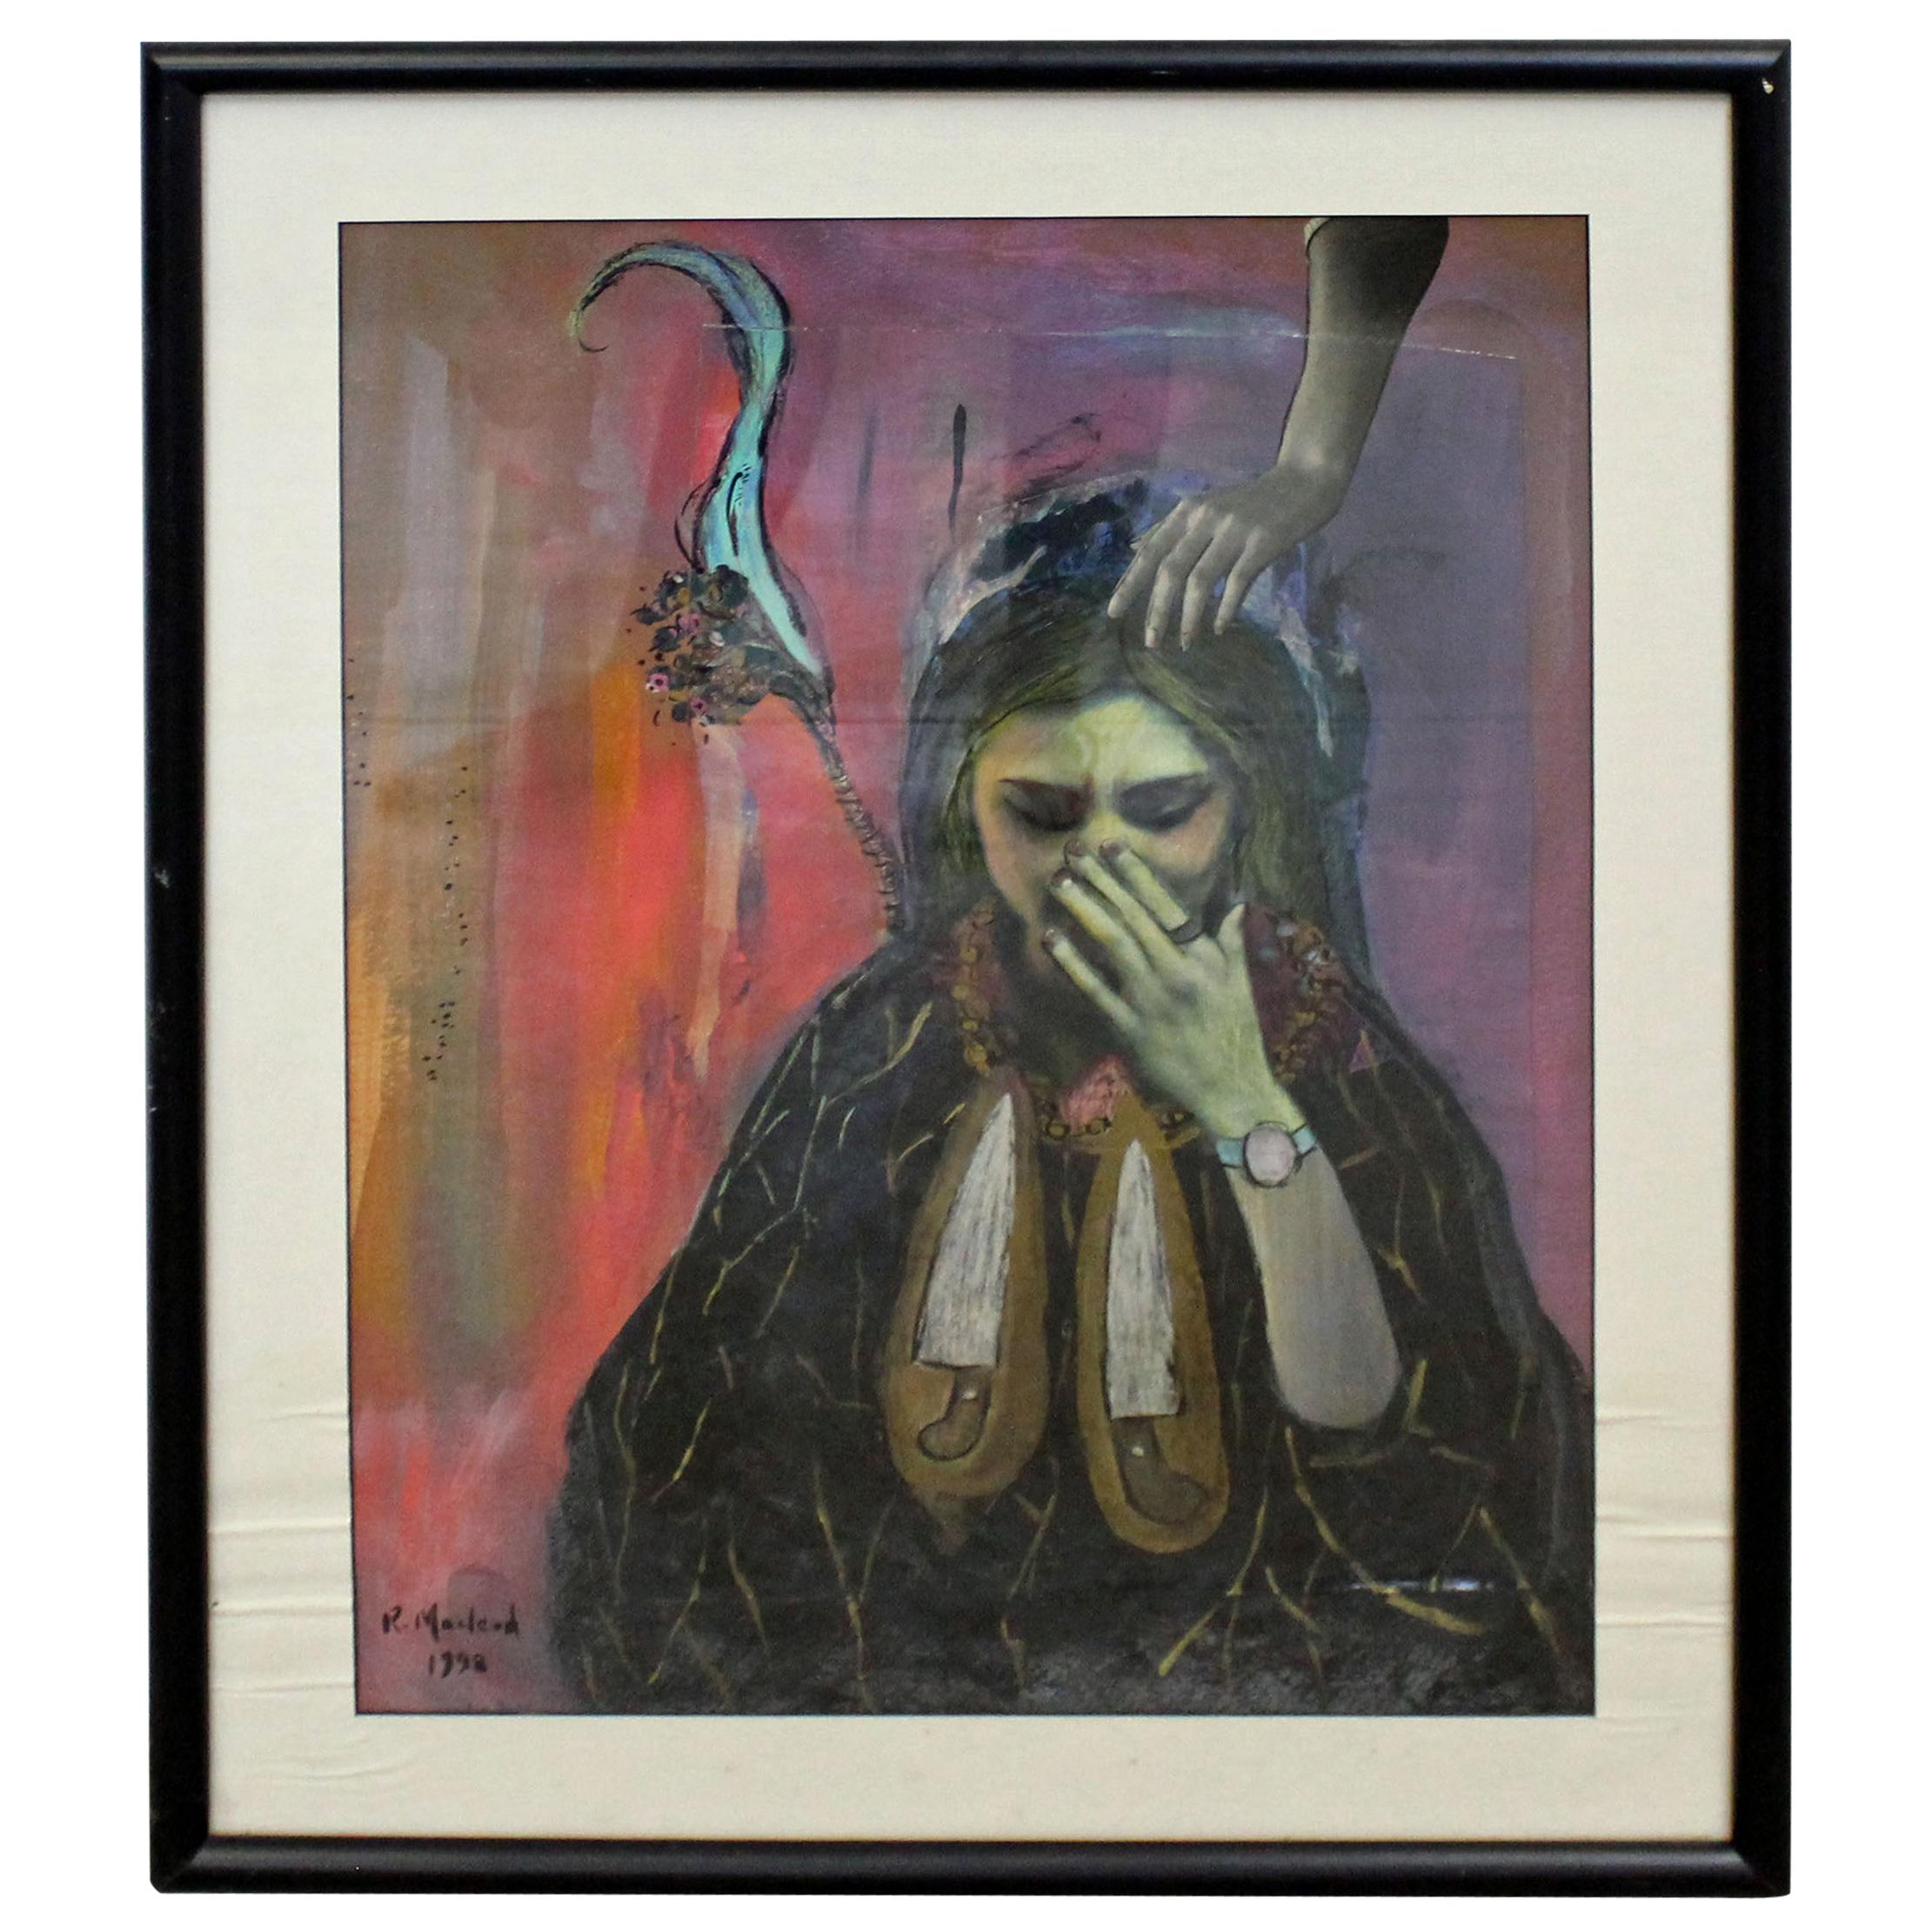 Vintage Modern Abstract Oil 'Sorrow' Painting of Woman Crying by R. Macleod